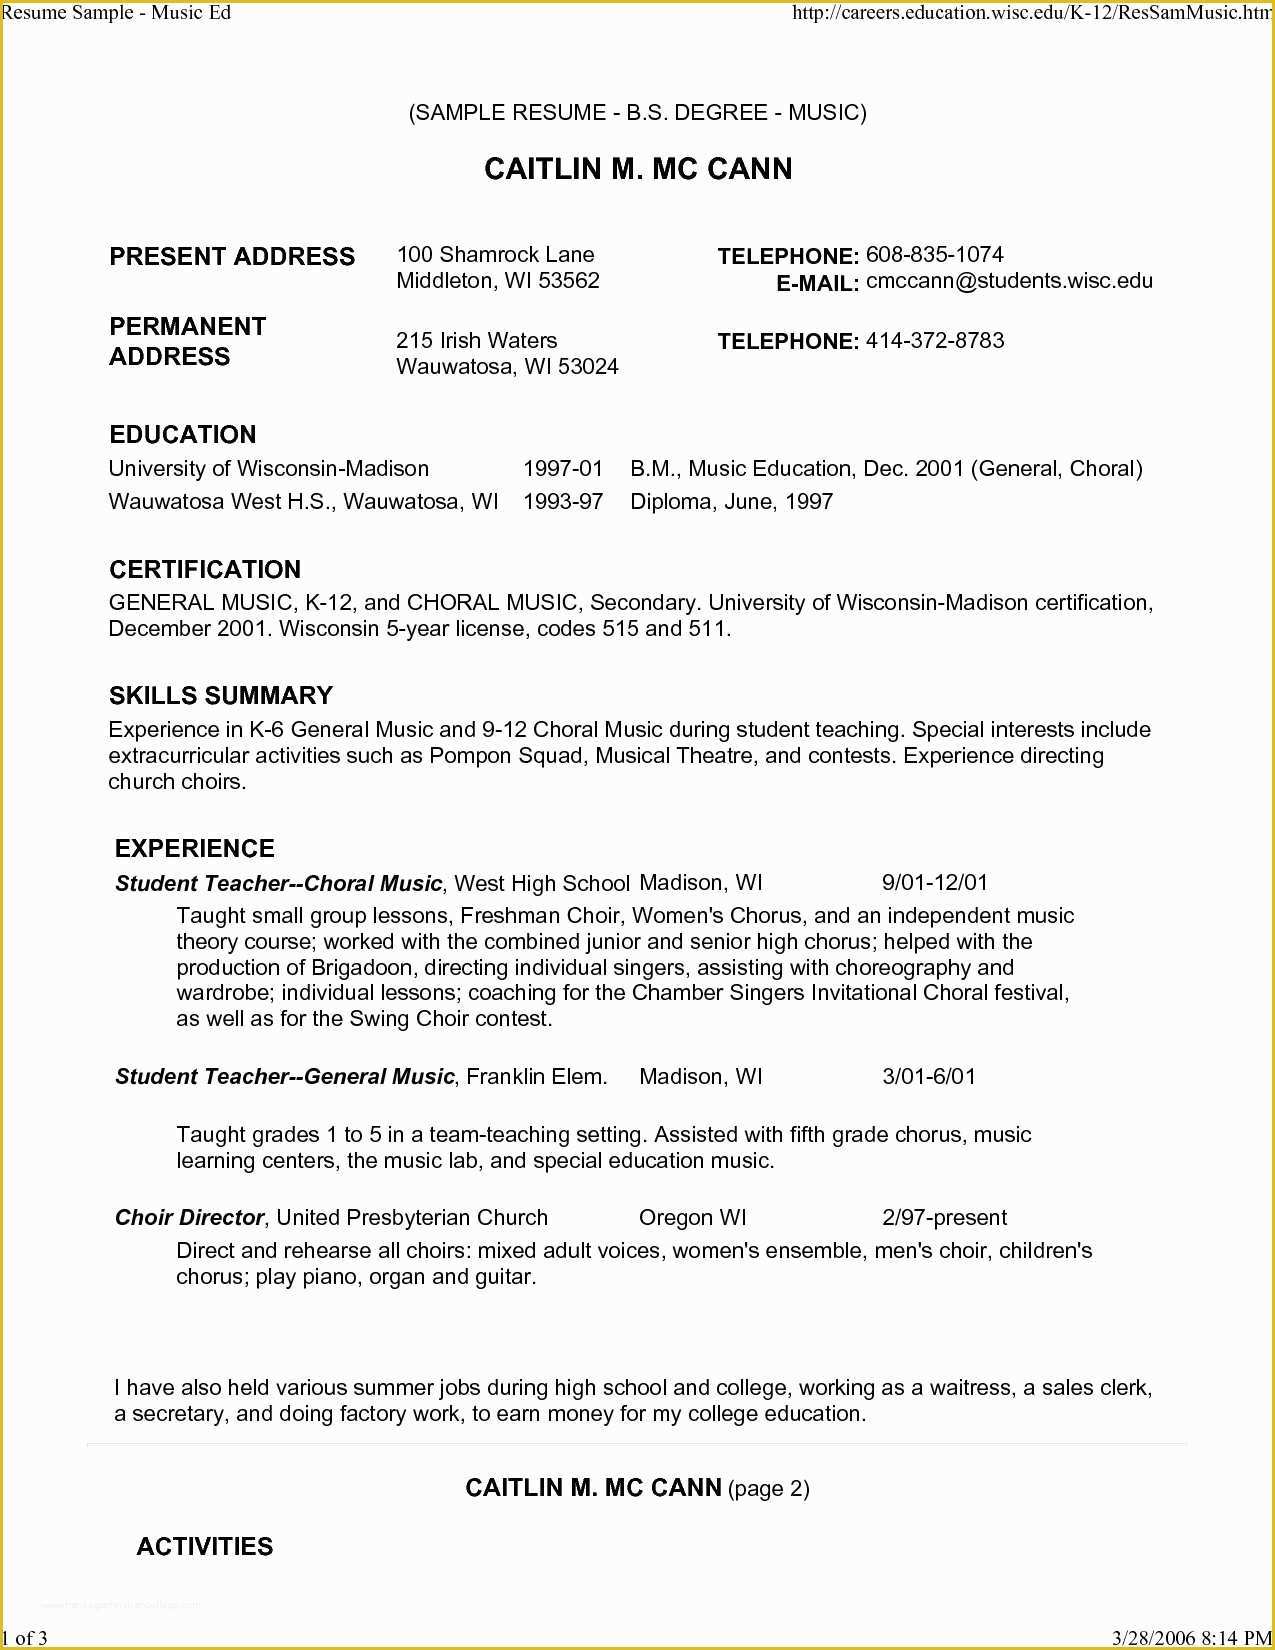 Free Musician Resume Template Of Activities Resume for College Application Sample Music